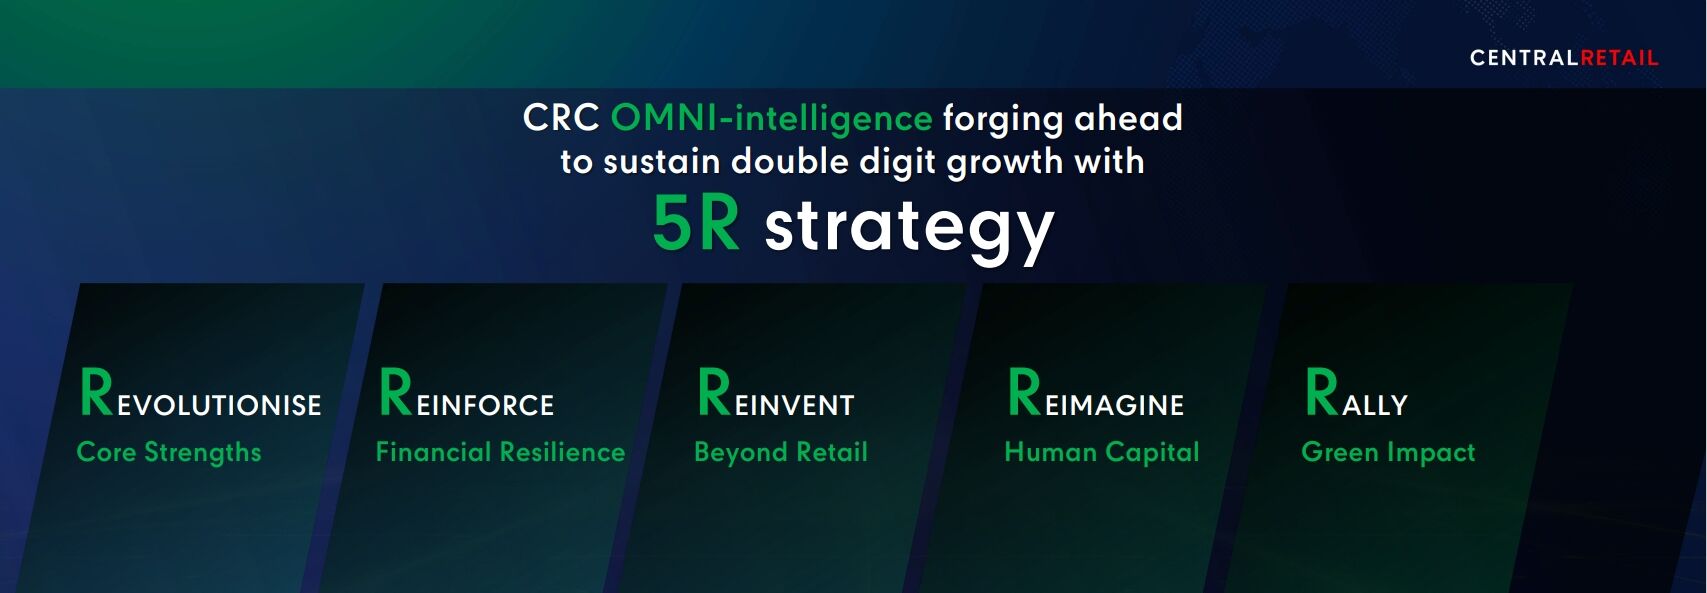 Leading the way to the next era with ‘CRC OMNI-Intelligence’ | News by Thaiger